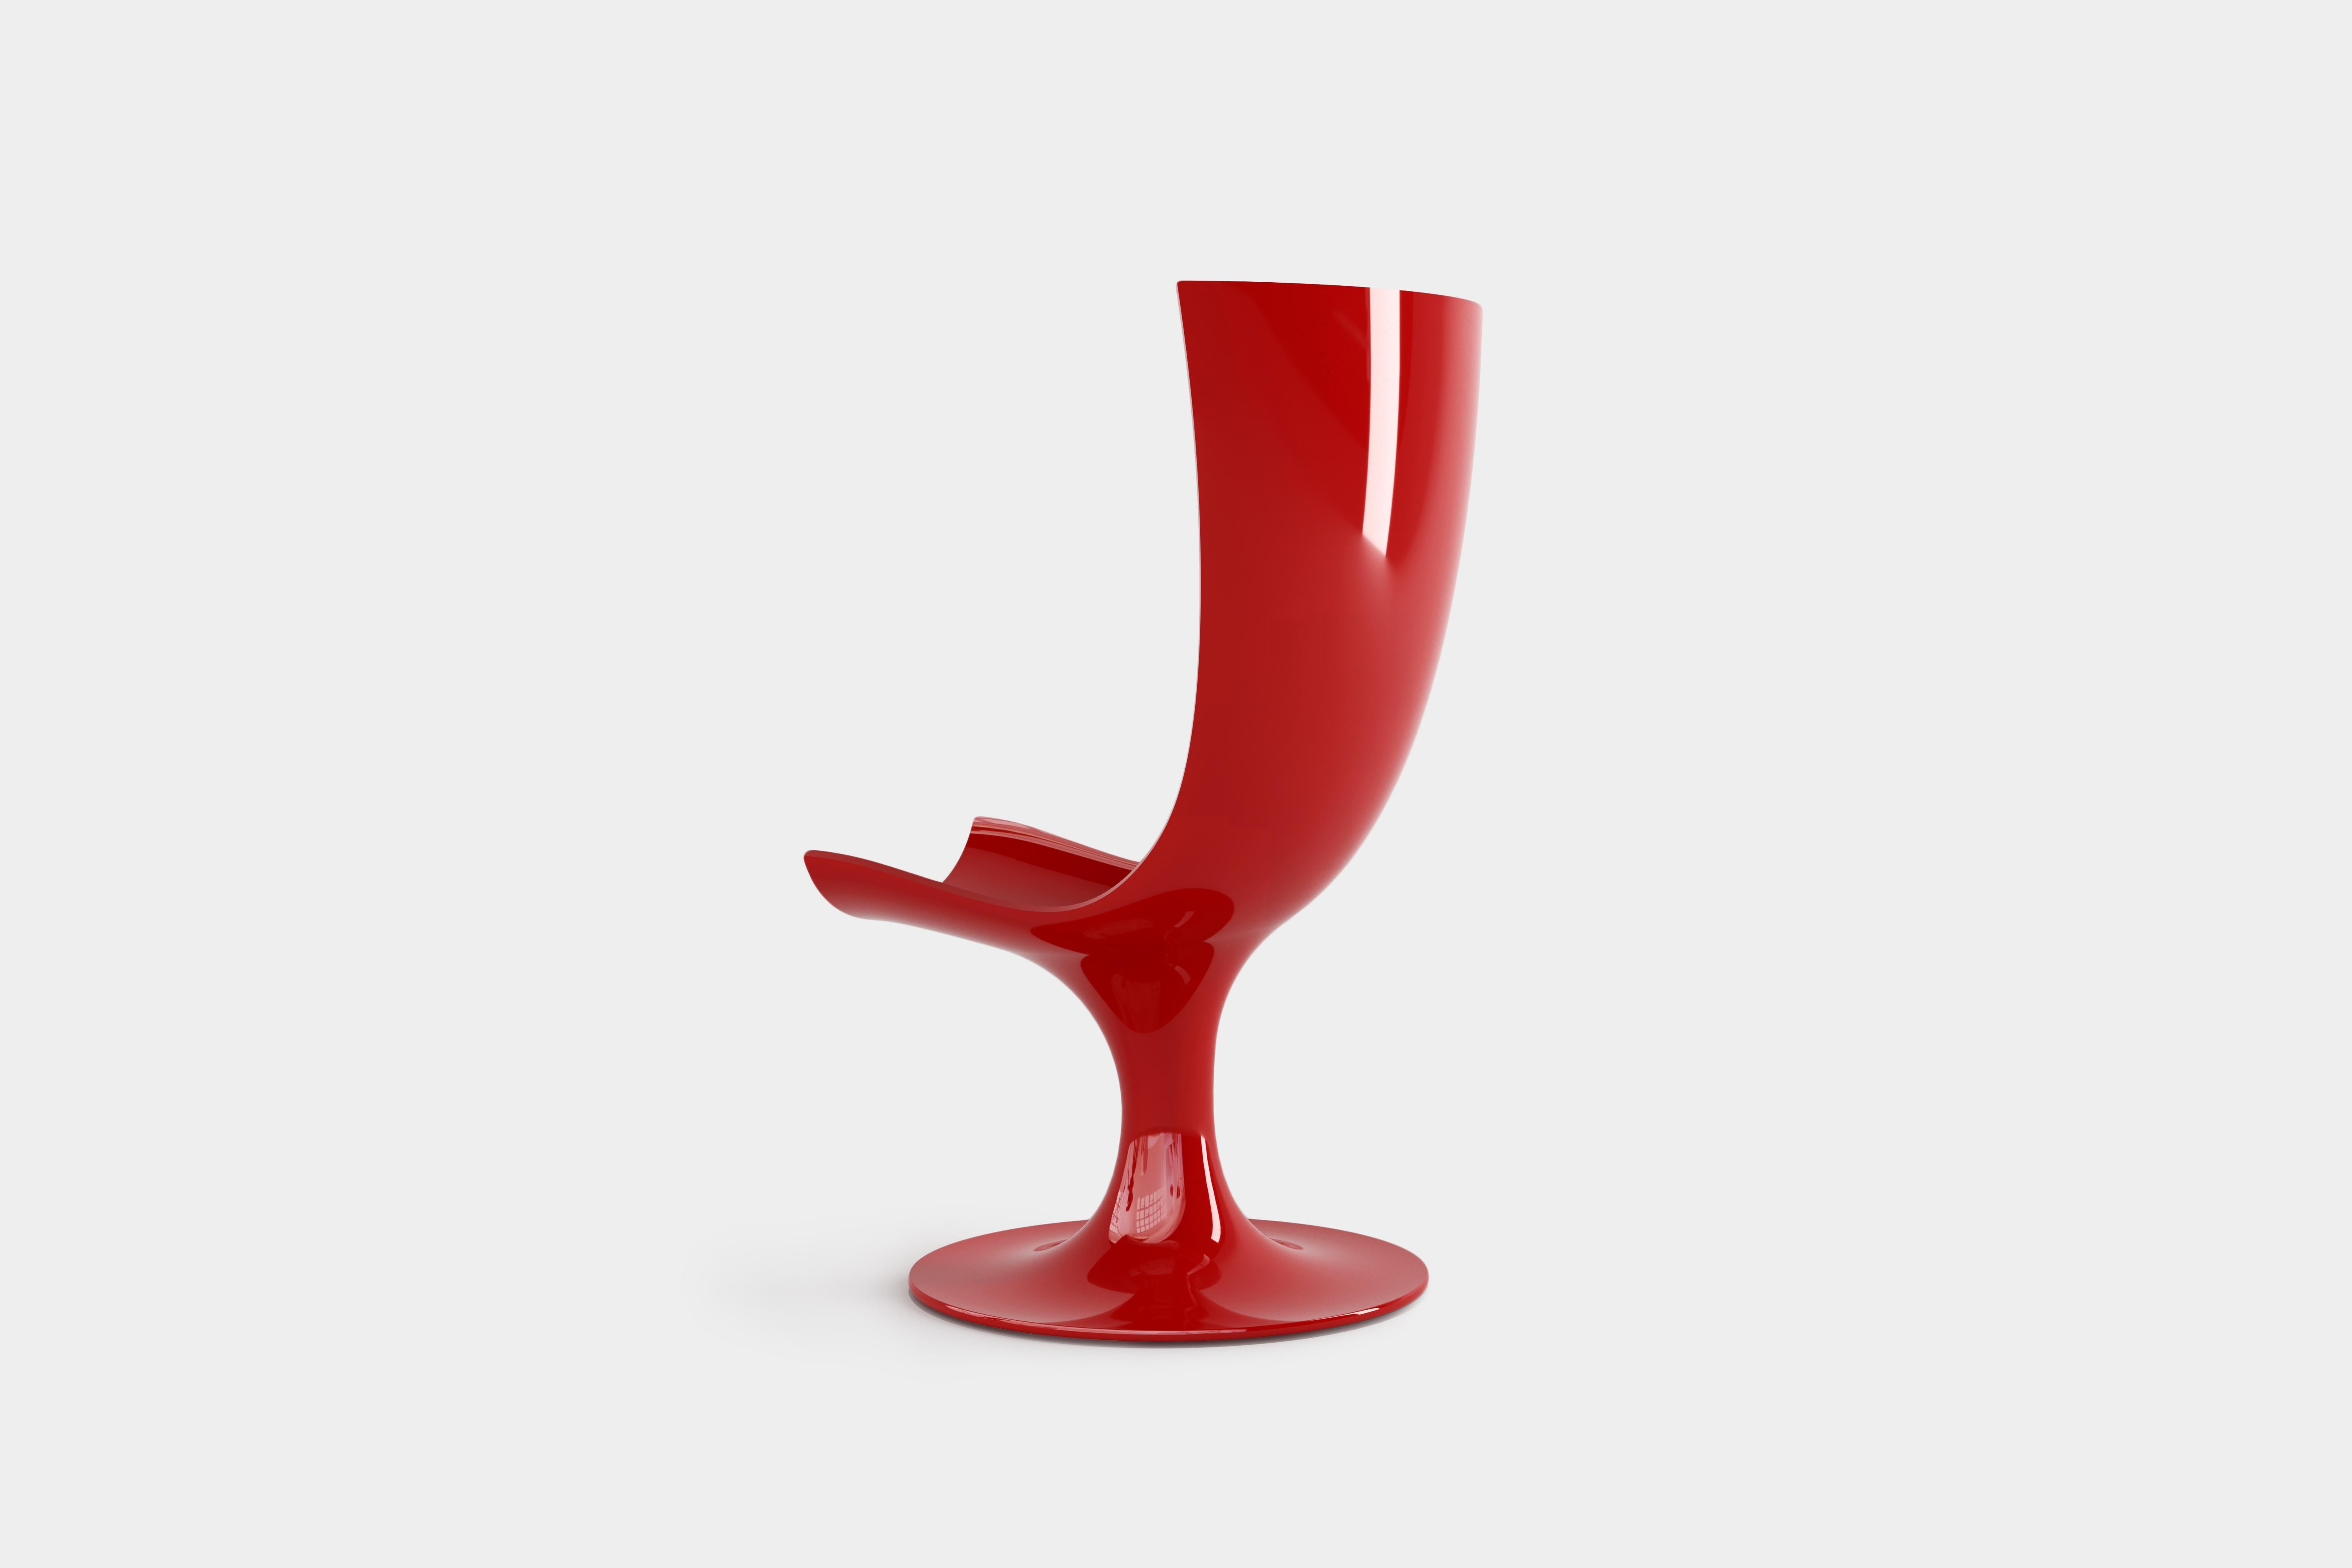 Polished Santos, Imposing Seat, Sculptural Chair in Red by Joel Escalona For Sale